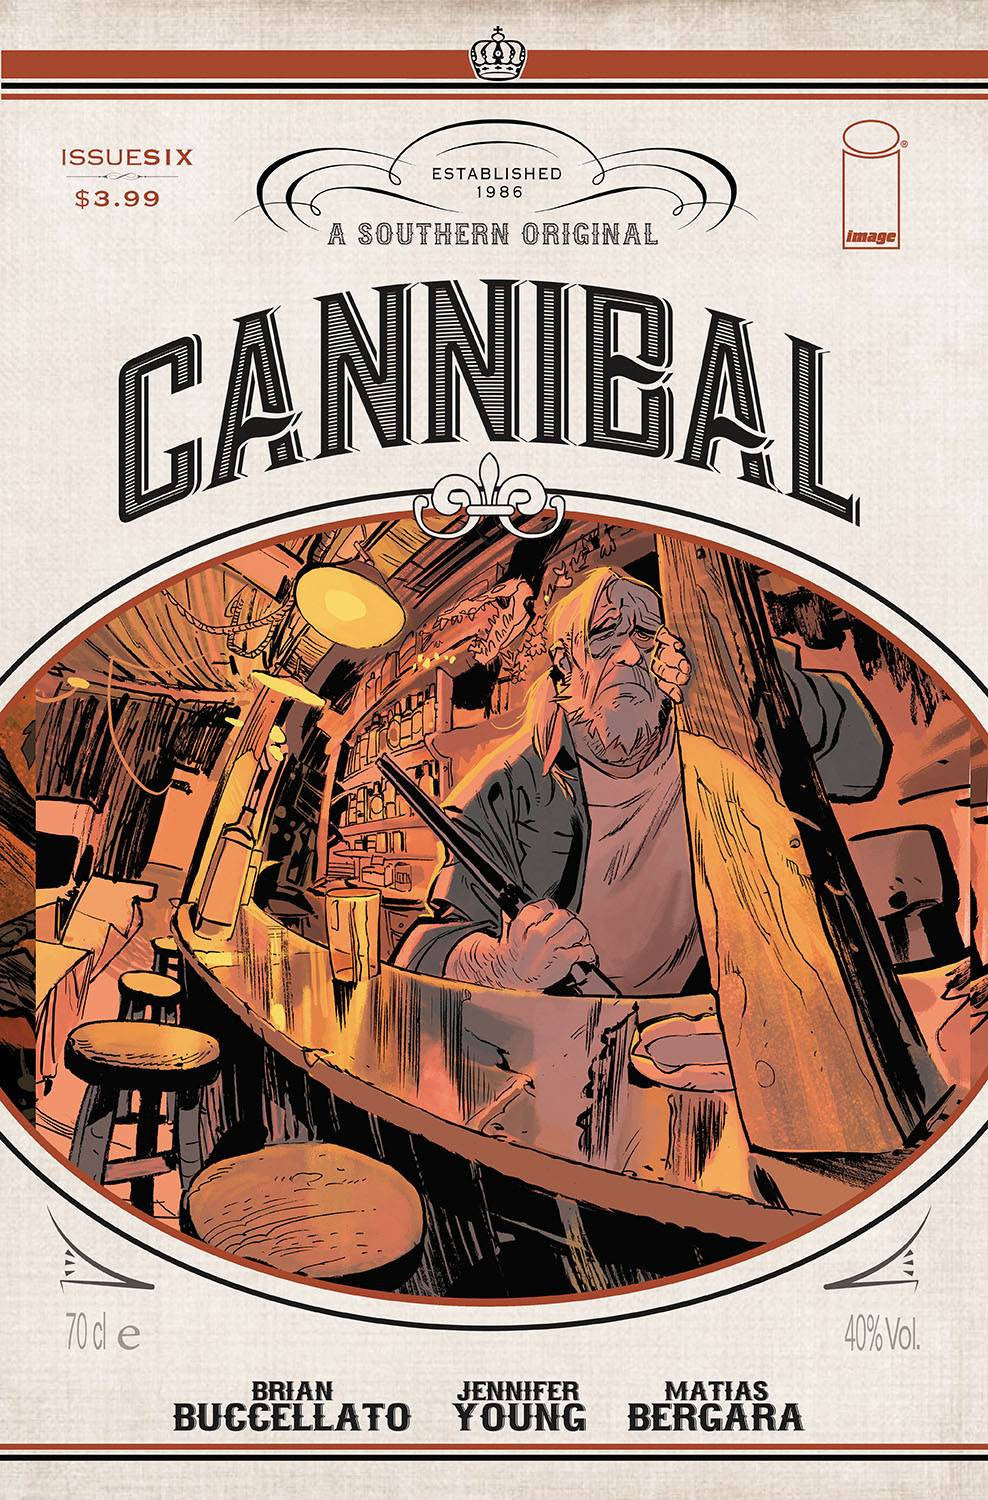 CANNIBAL #6 COVER